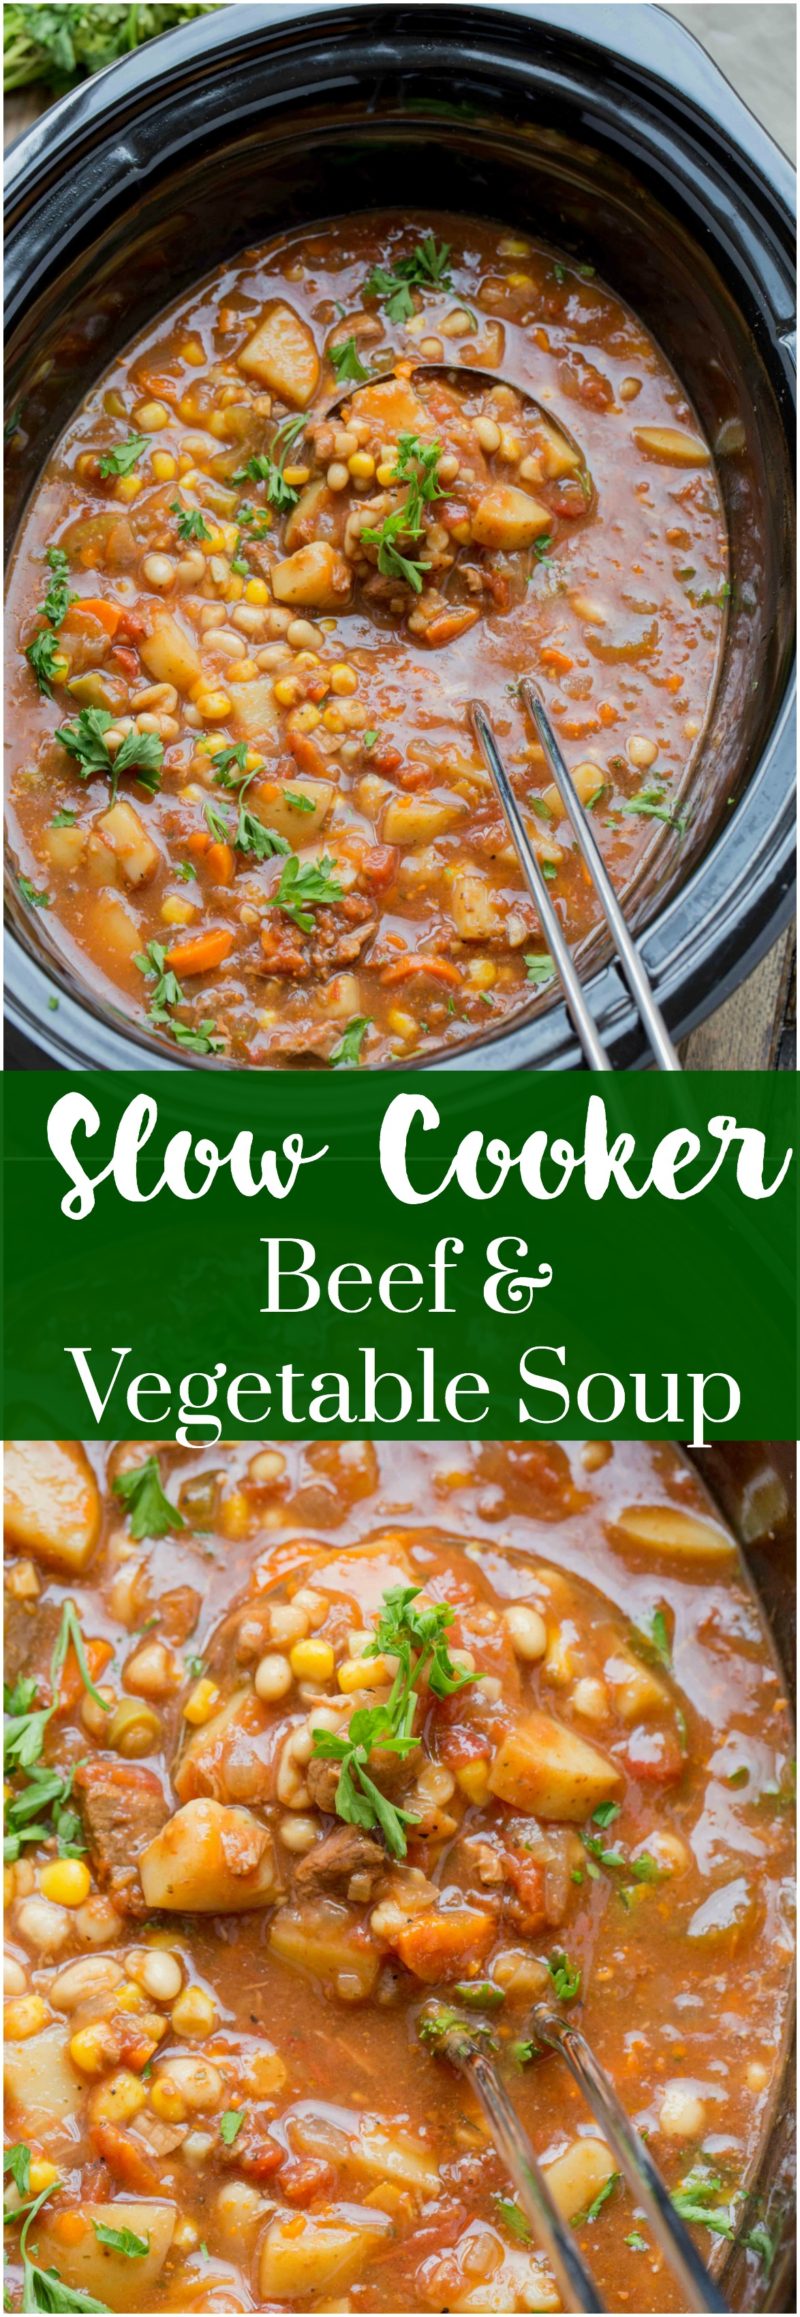 Slow Cooker Beef and Vegetable Soup - My Kitchen Craze